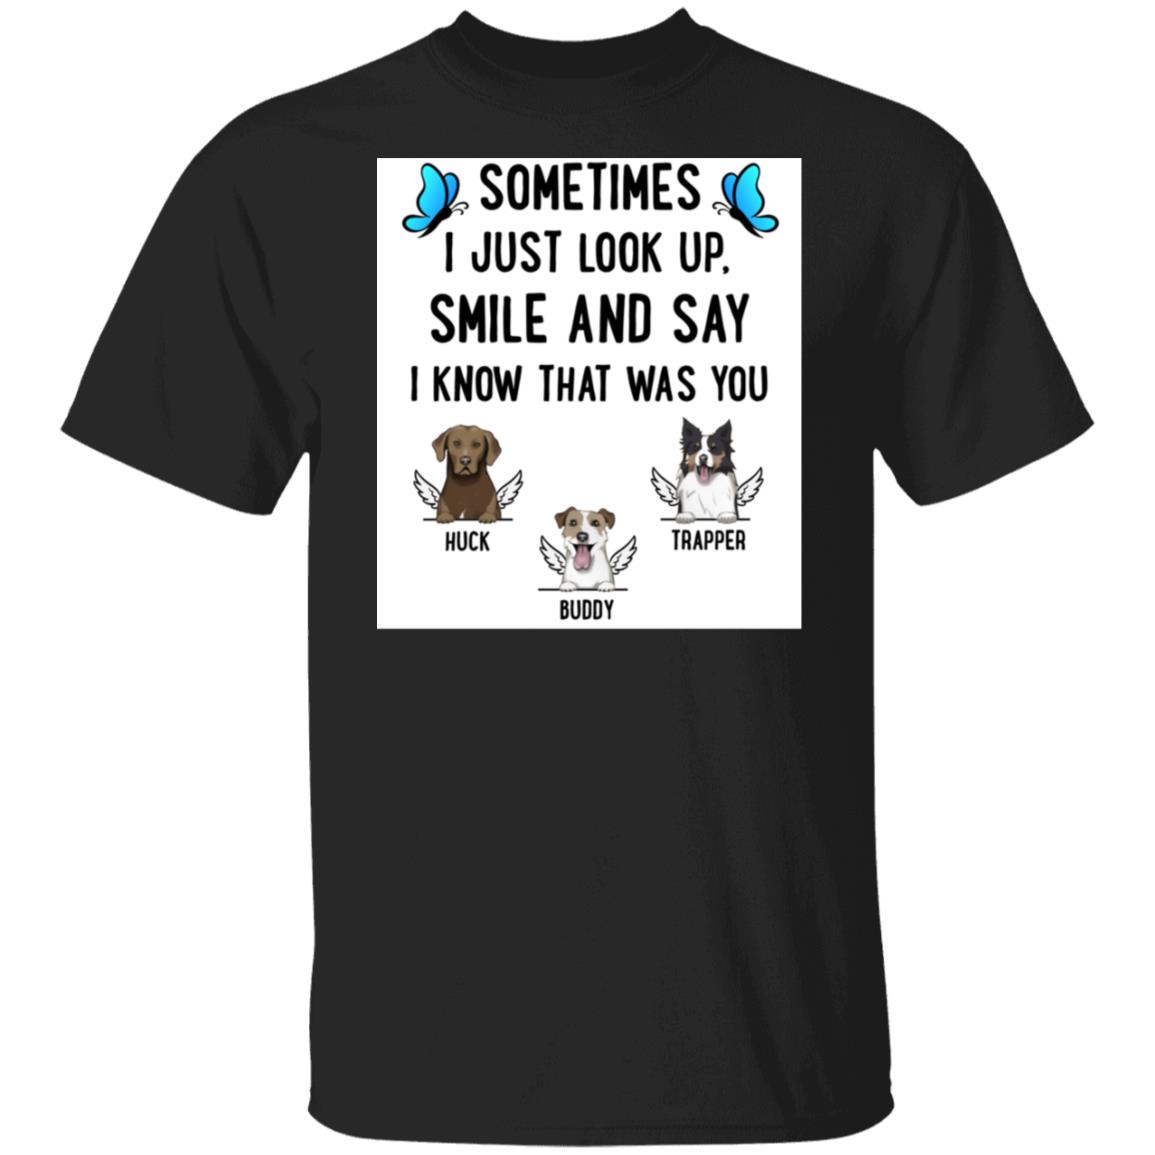 Sometimes I Just Look Up, Smile and Say  ... Personalized Standard Tee Black  – Choose Your Dog’s Breed and Name (Up to 5 Dogs)